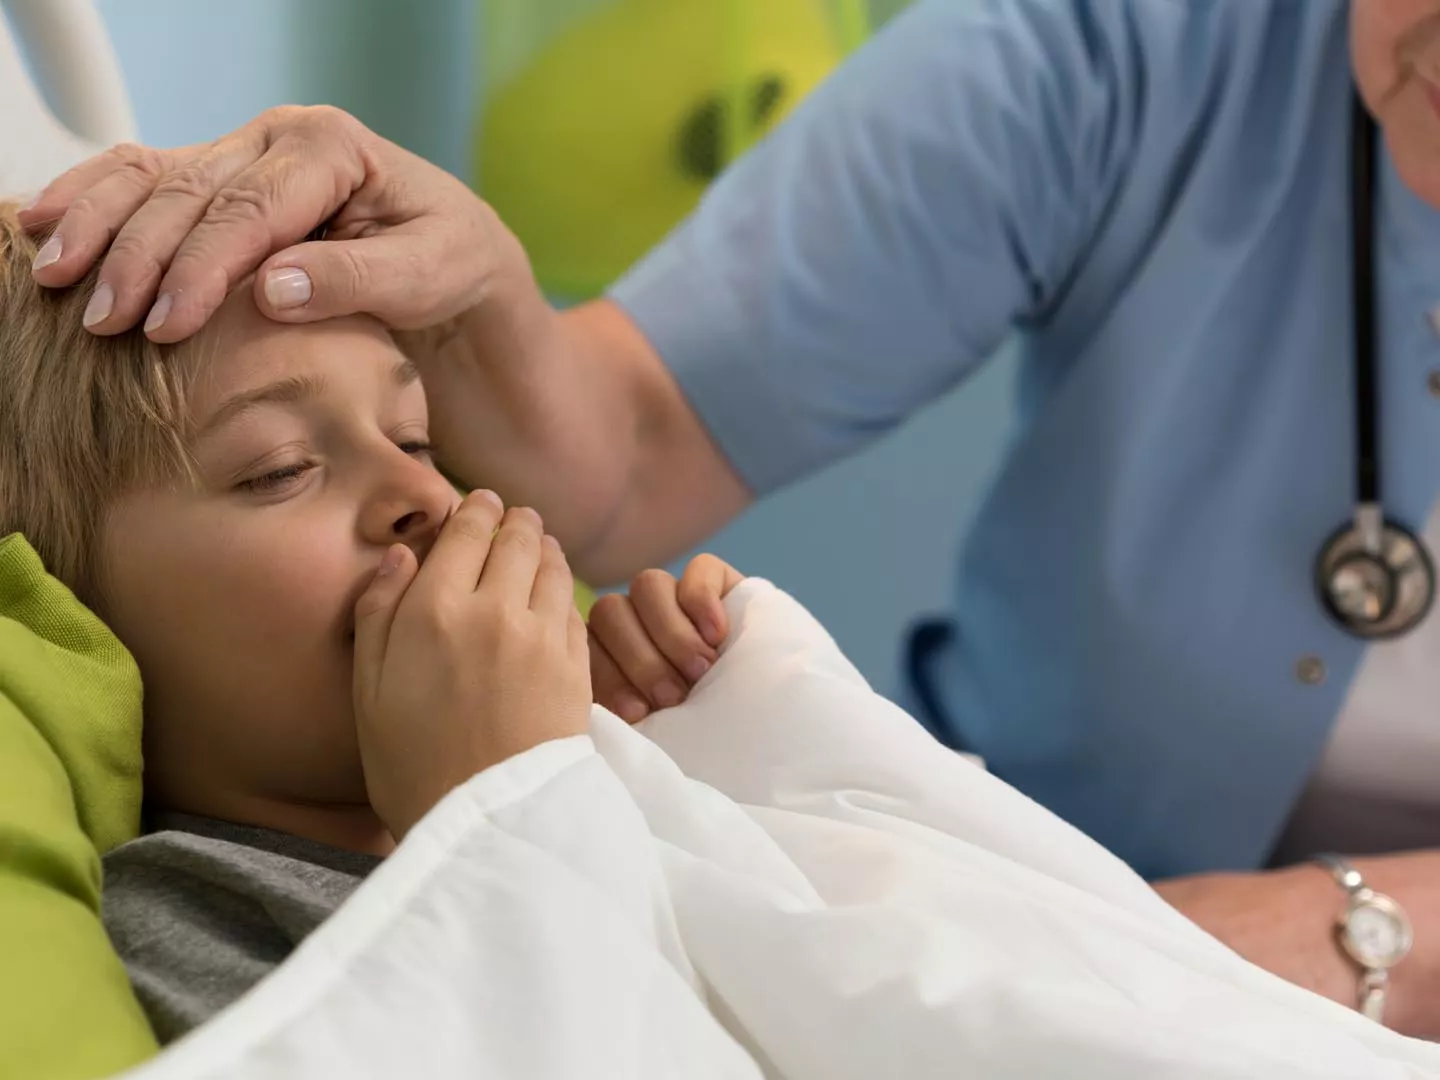 What are the Symptoms of Whooping Cough and the Treatment for Whooping Cough?